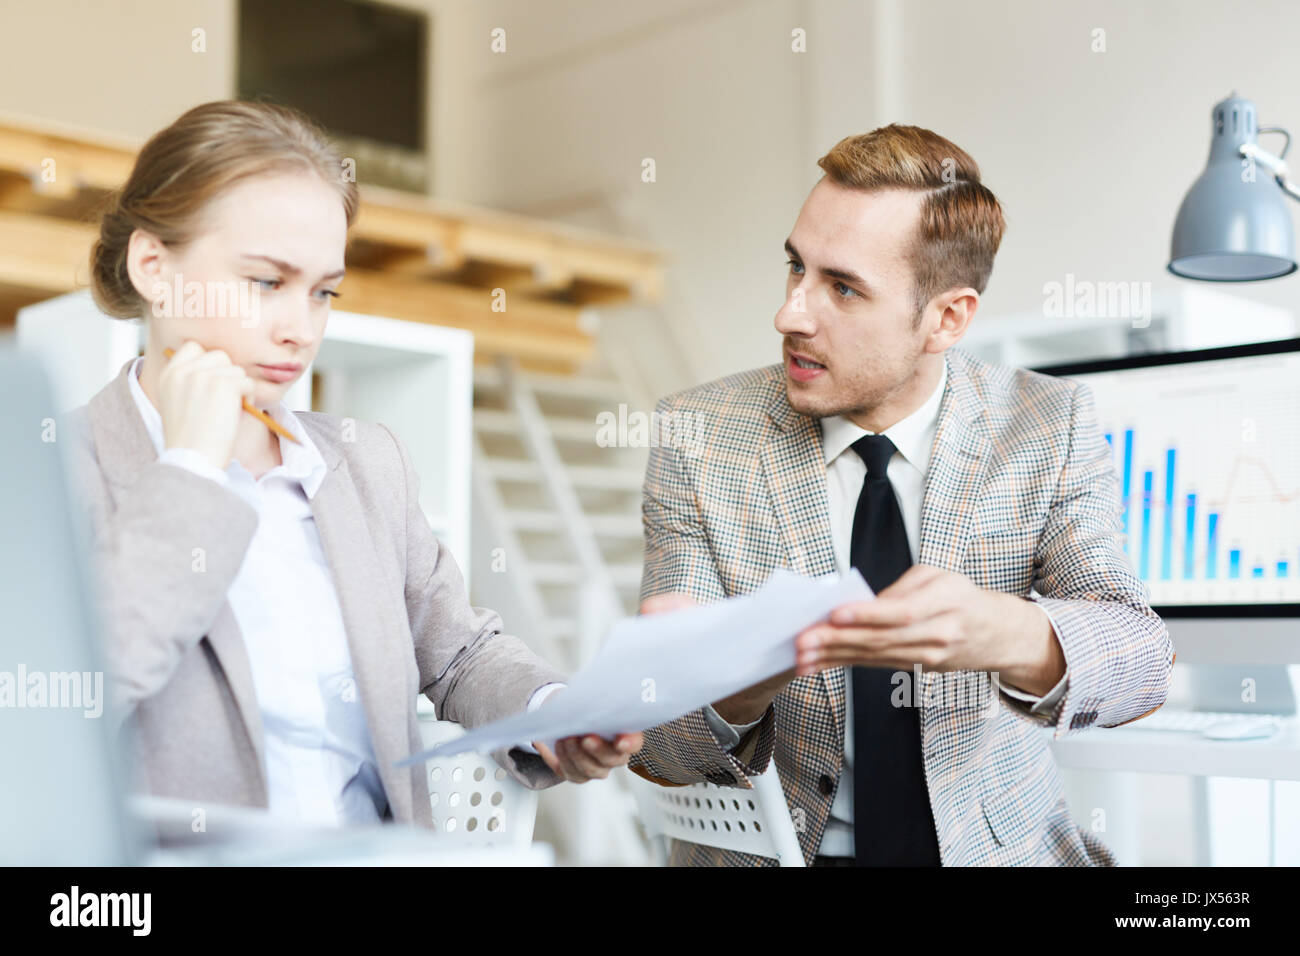 Sharing Ideas with Pretty Coworker Stock Photo